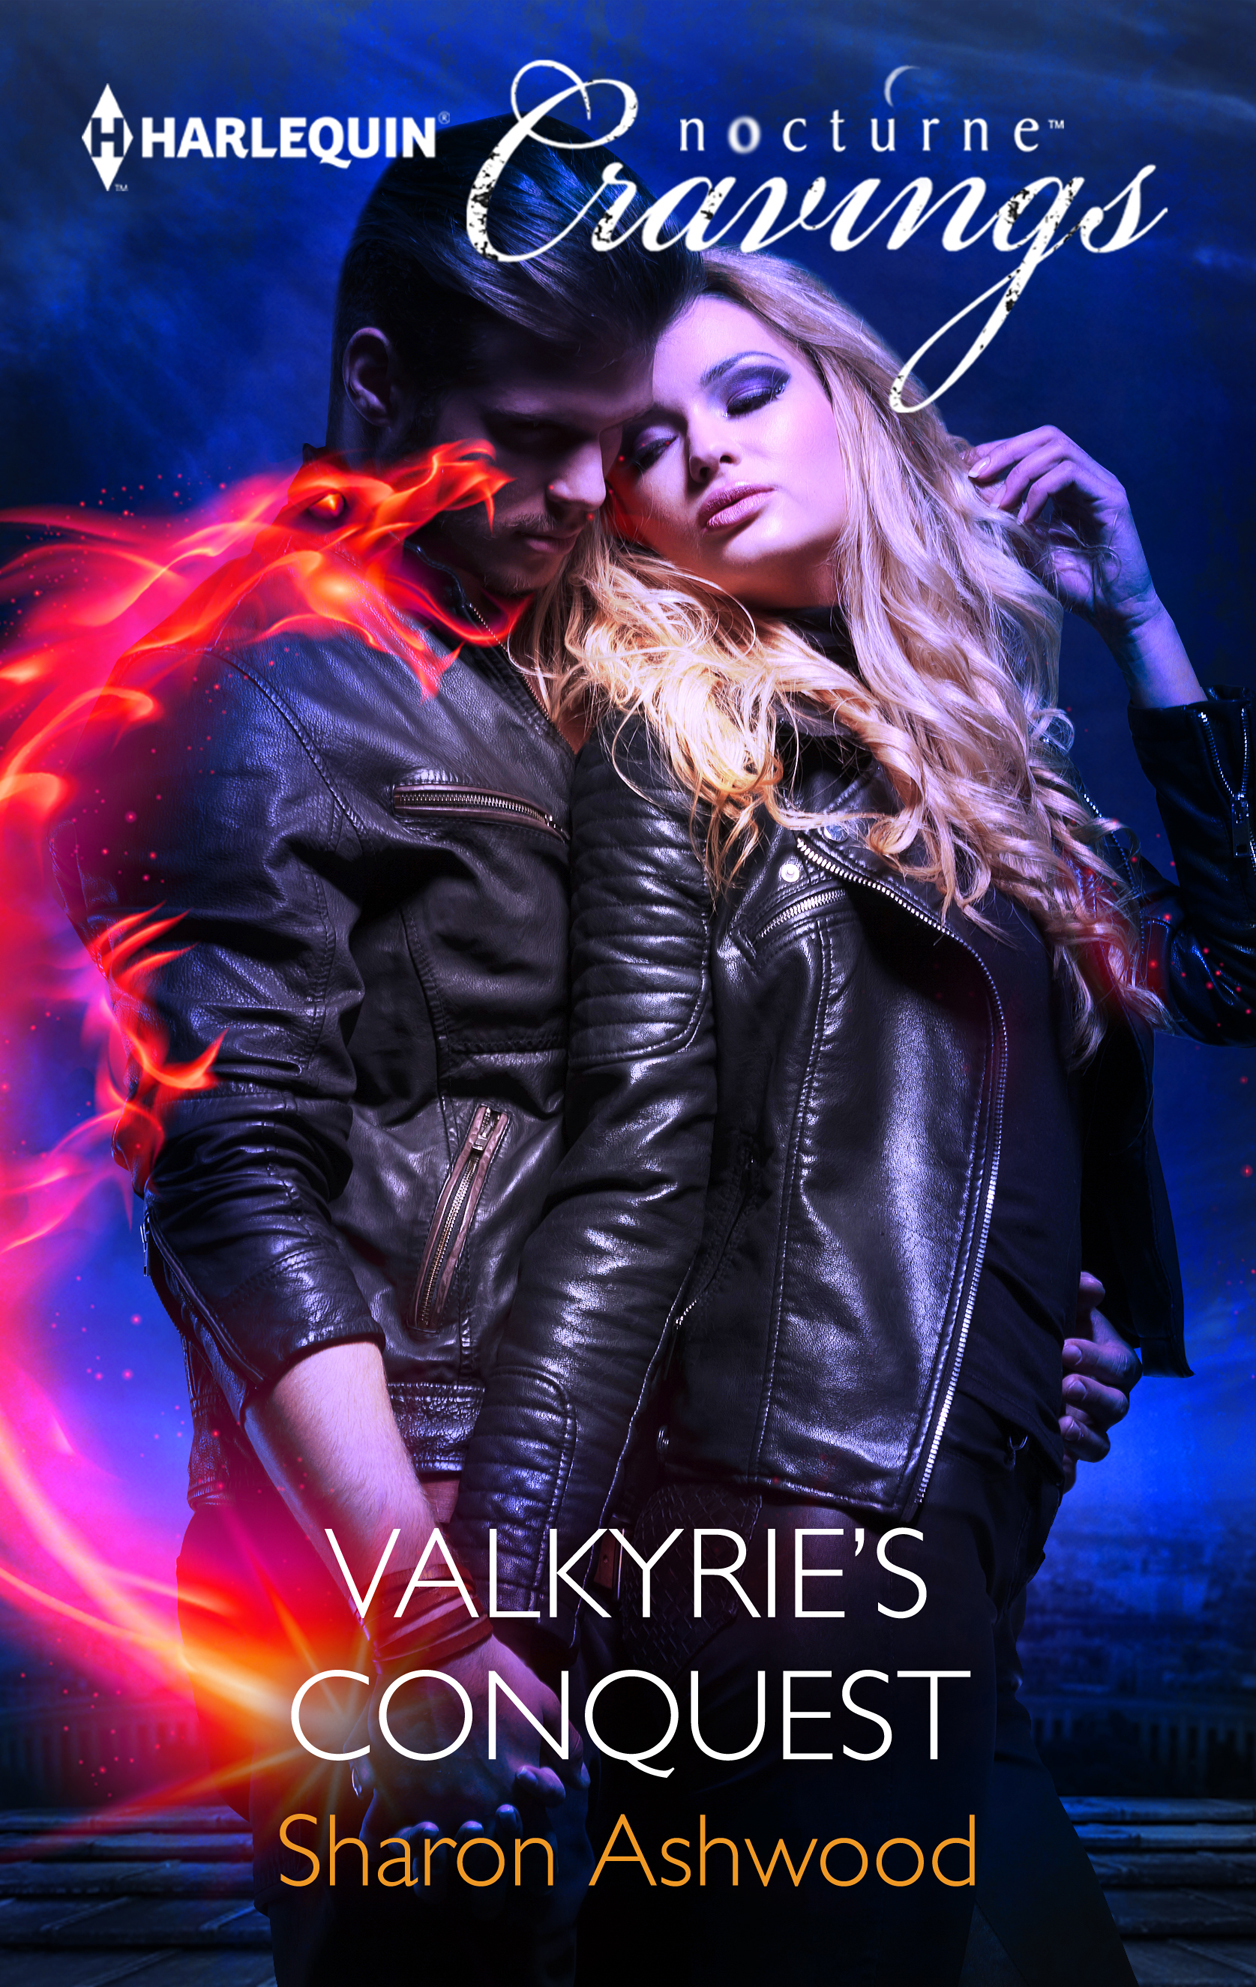 Valkyrie's Conquest (2014)